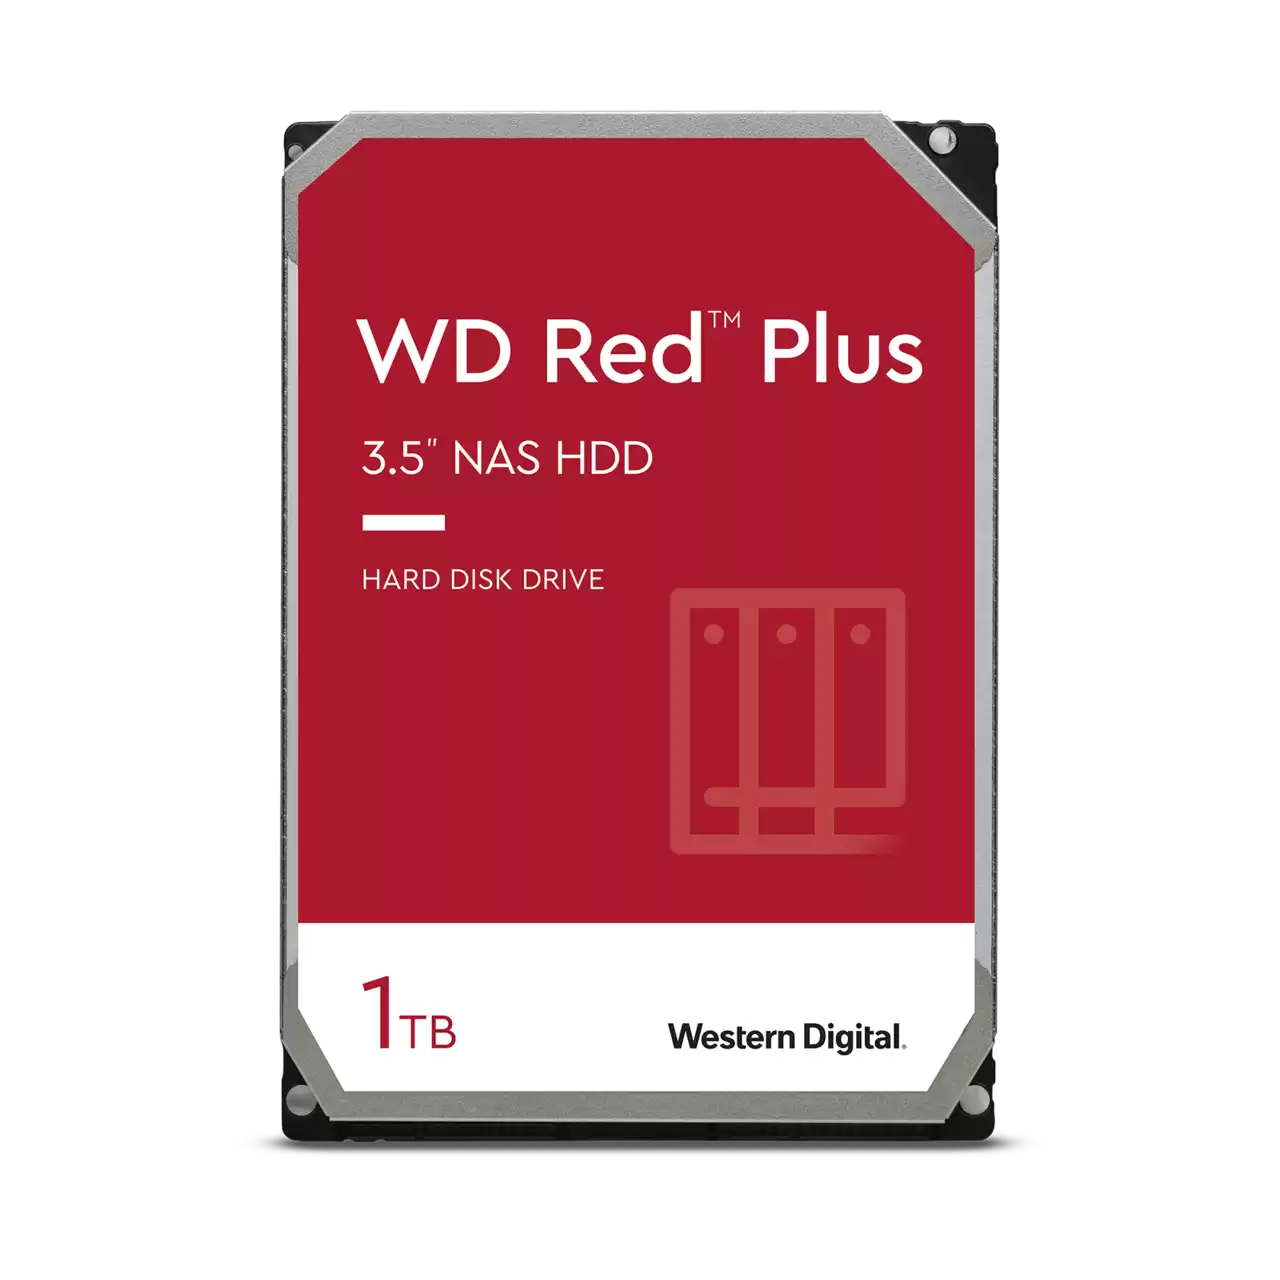 WD Red™ Plus NAS Hard Drive 3.5